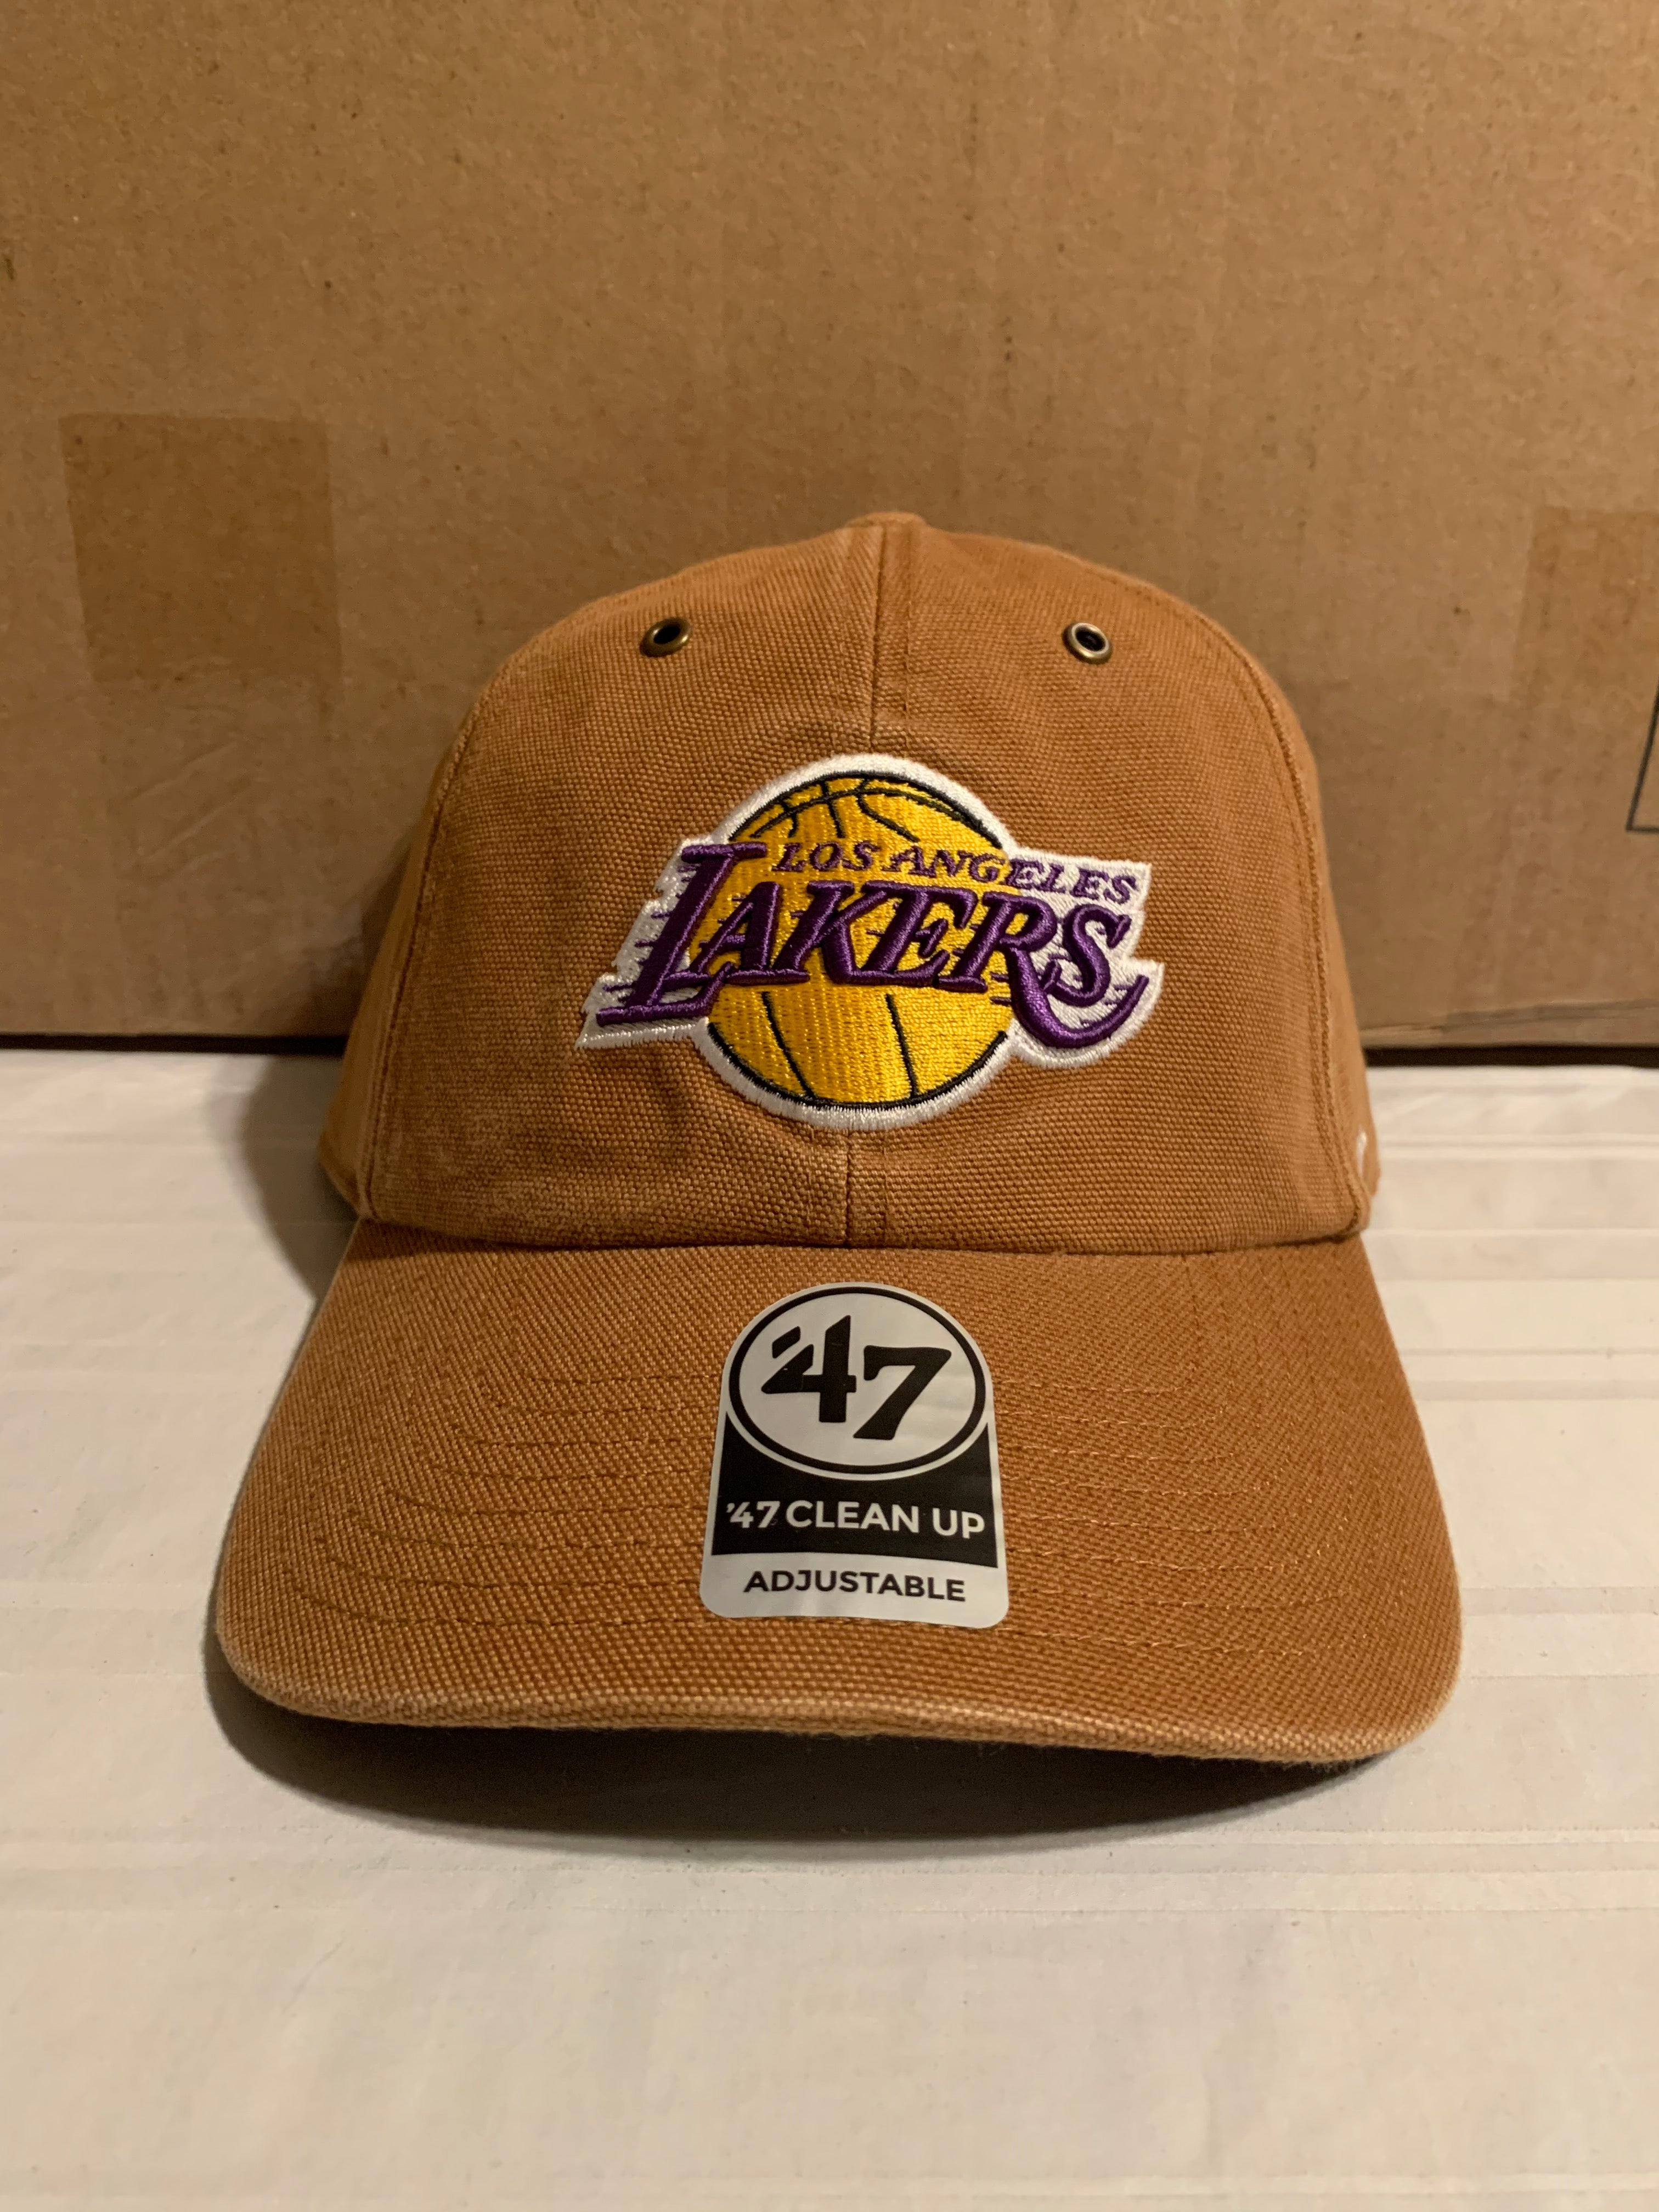 Hat collection Lakers Carhartt State/rapper - Depop